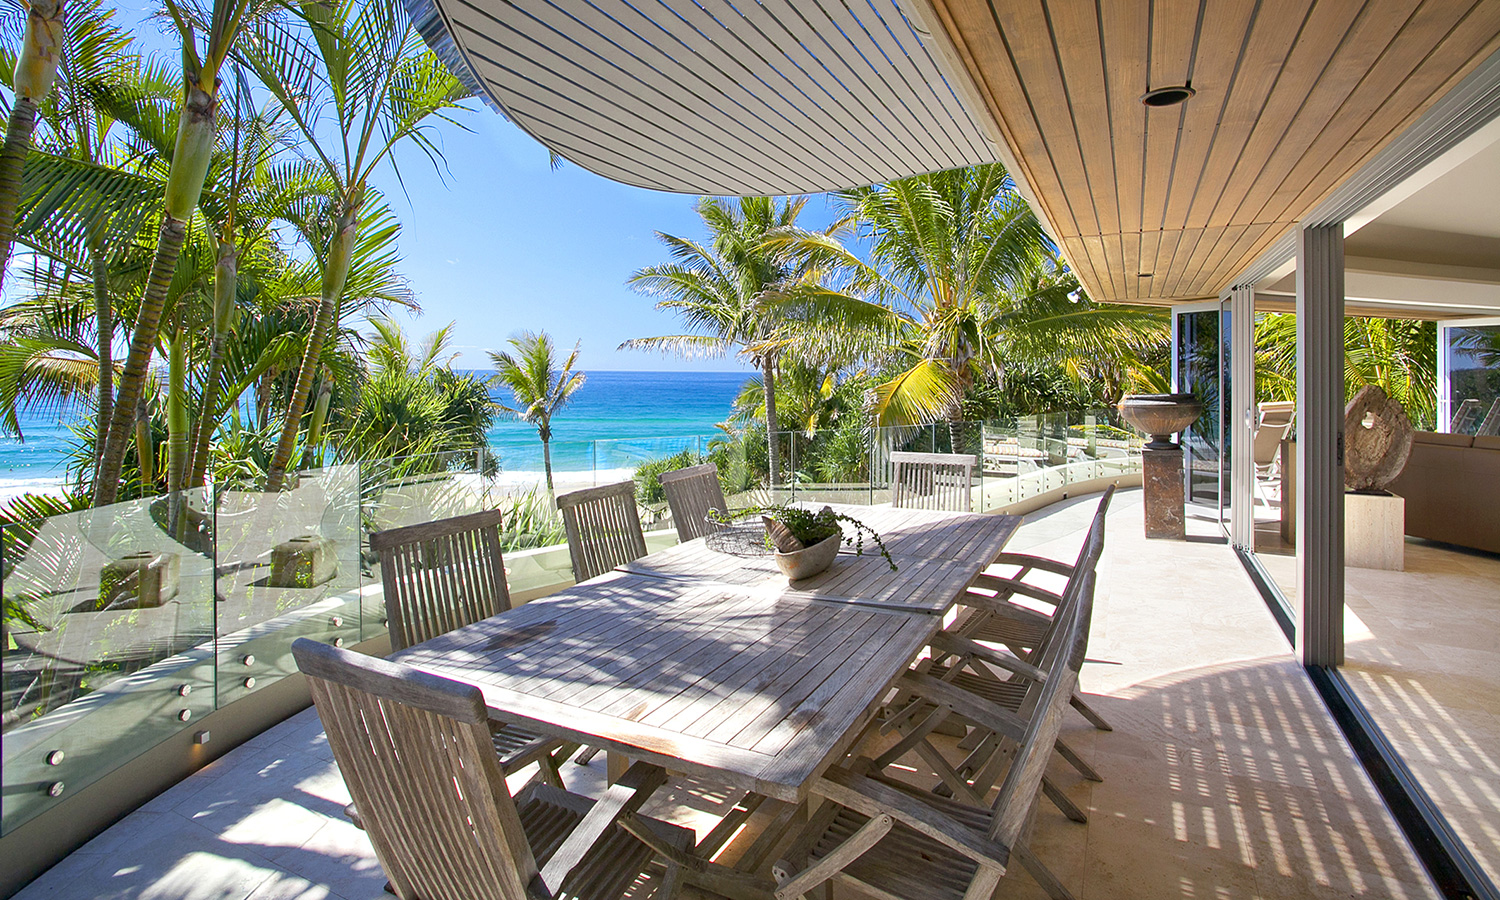 Book Your Holiday Accommodation Place At Sunshine Beach